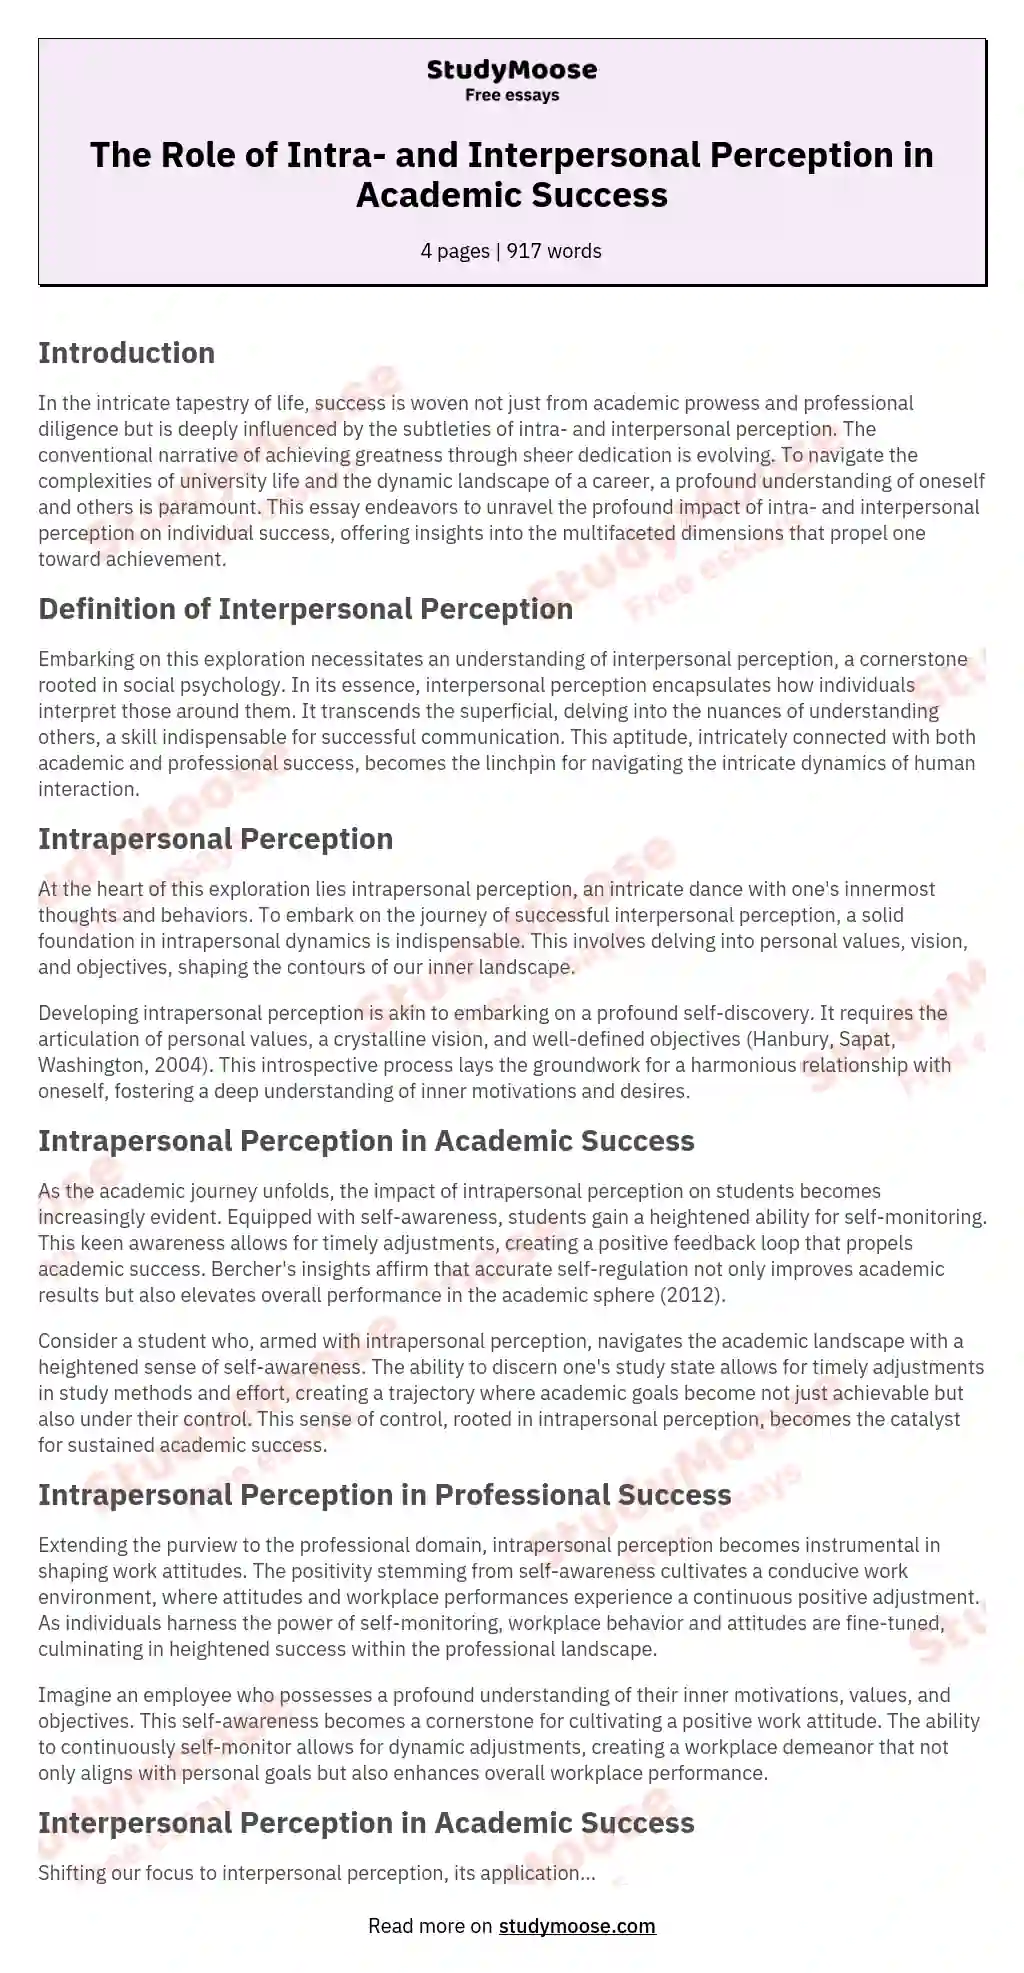 The Role of Intra- and Interpersonal Perception in Academic Success essay